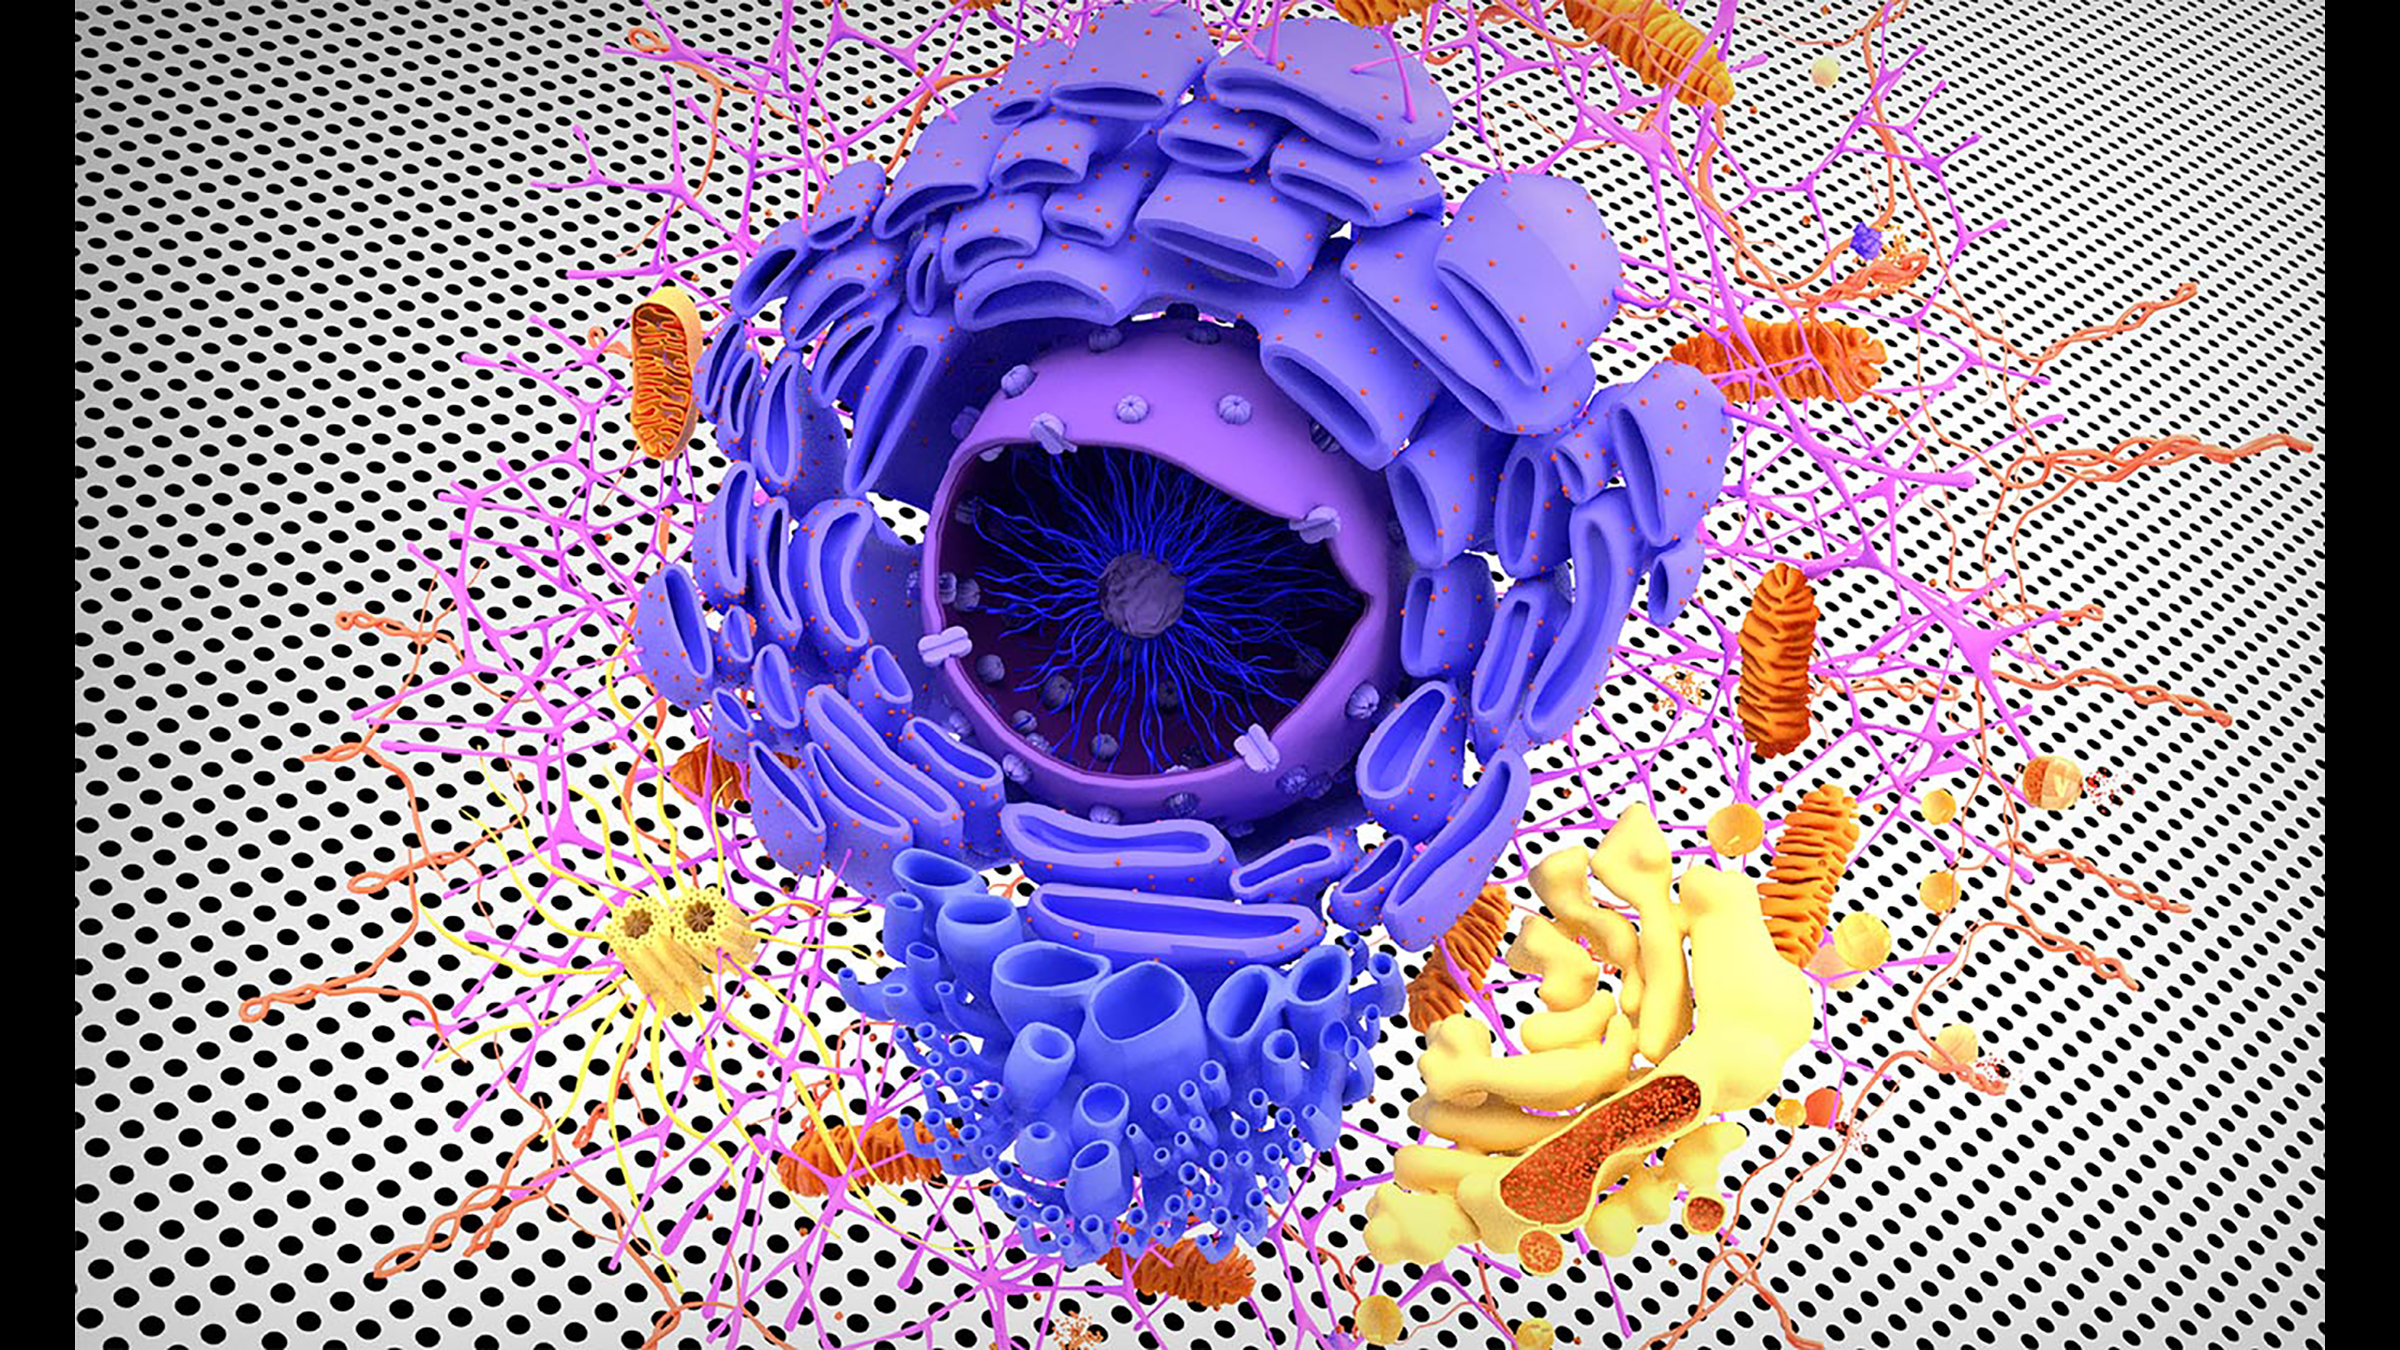 Illustration of a biological cell